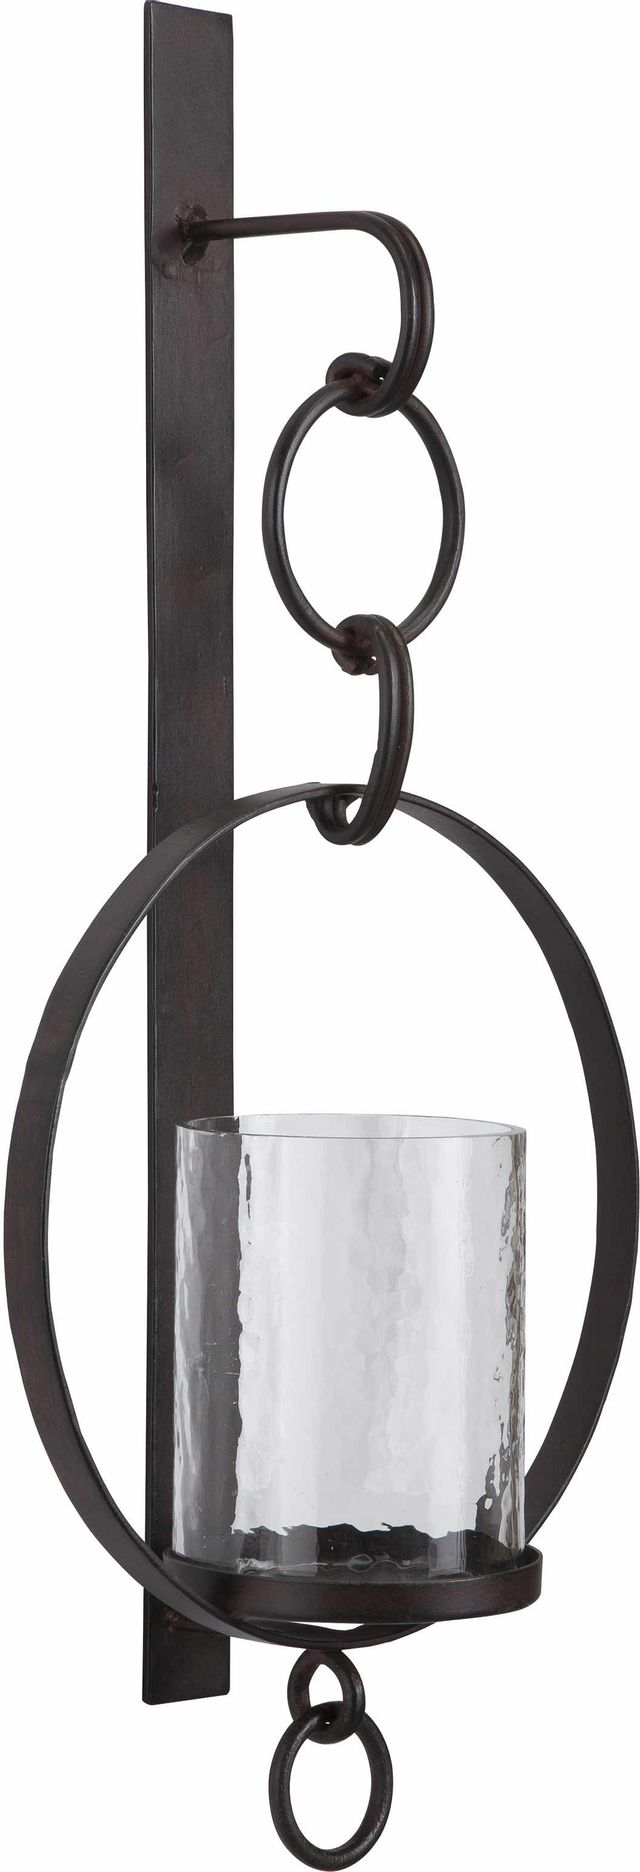 Signature Design by Ashley® Ogaleesha Brown Wall Sconce Candle Holder